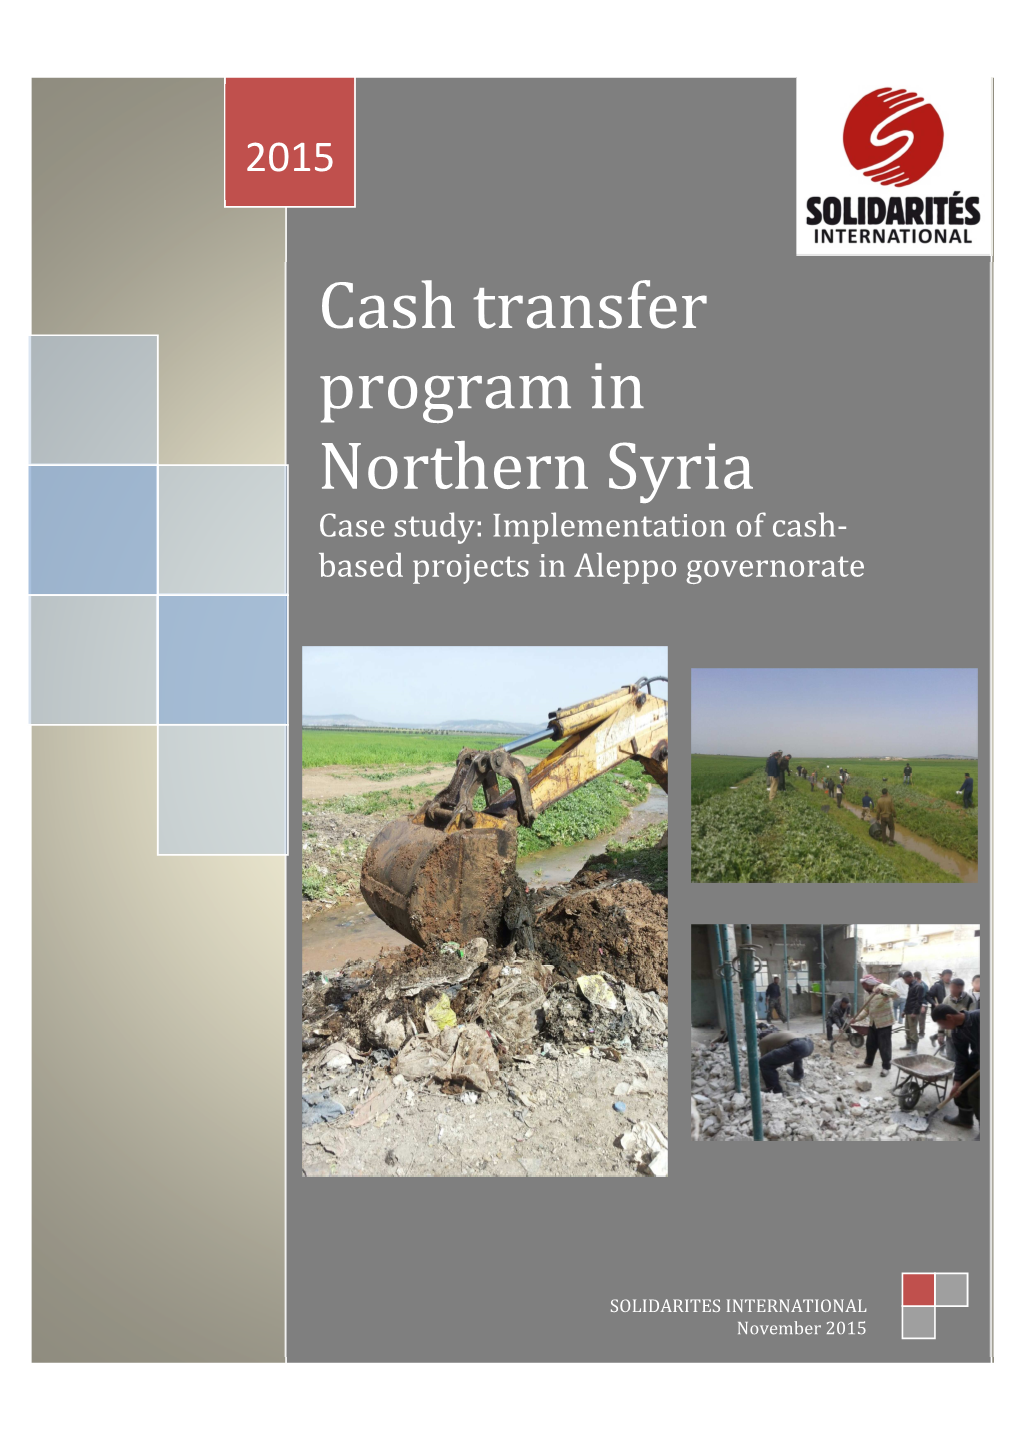 Cash Transfer Program in Northern Syria Case Study: Implementation of Cash- Based Projects in Aleppo Governorate